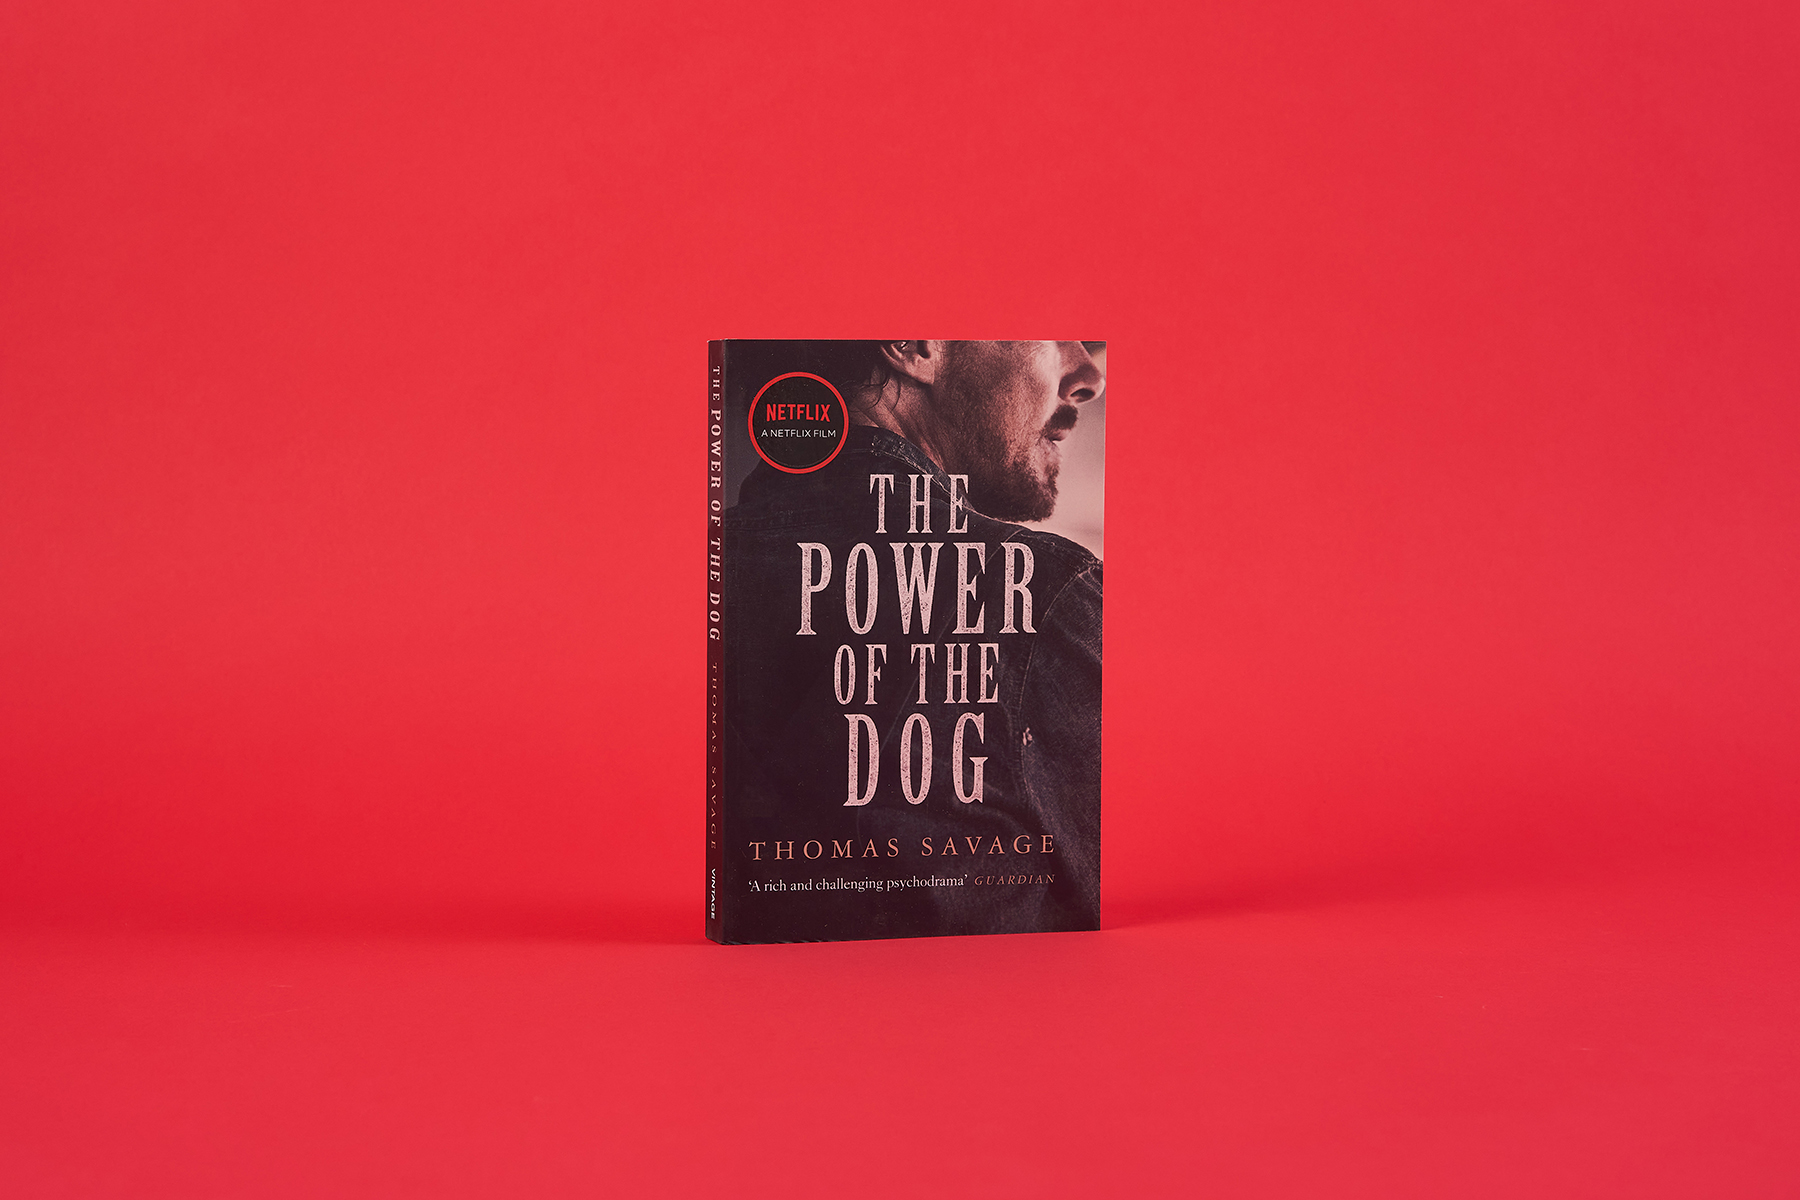 Book, The Power of the Dog, standing upright against a red background. The front cover includes a photograph of Benedict Cumberbatch.